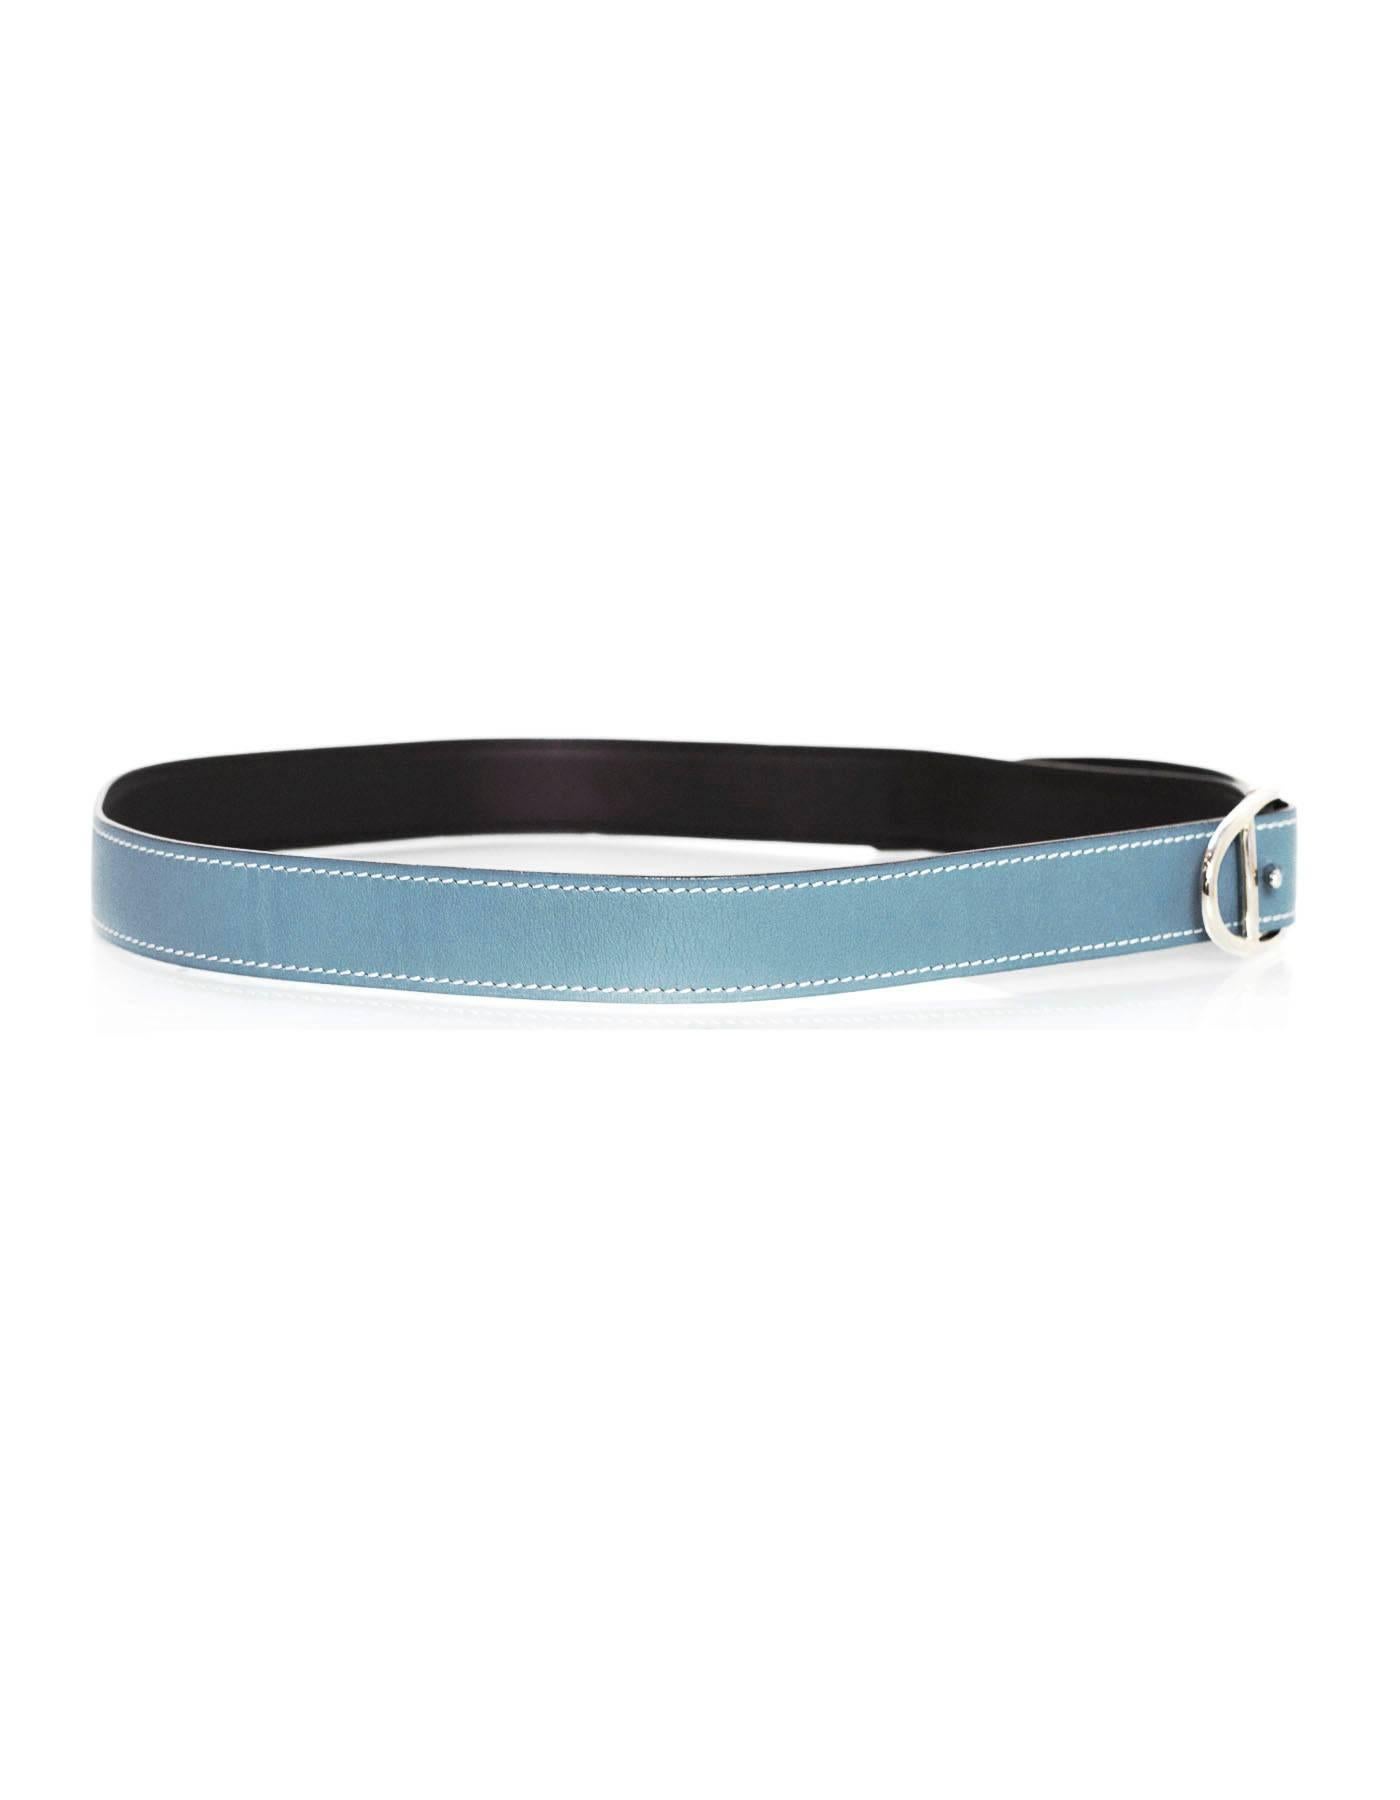 Hermes Blue Jean Leather Chaine d'Ancre Belt 
Features cream contrast stitching

Made In: France
Year of Production: 2006
Color: Blue Jean (baby blue) and dark brown
Hardware: Palladium
Materials: Leather and metal
Closure/Opening: Buckle and notch